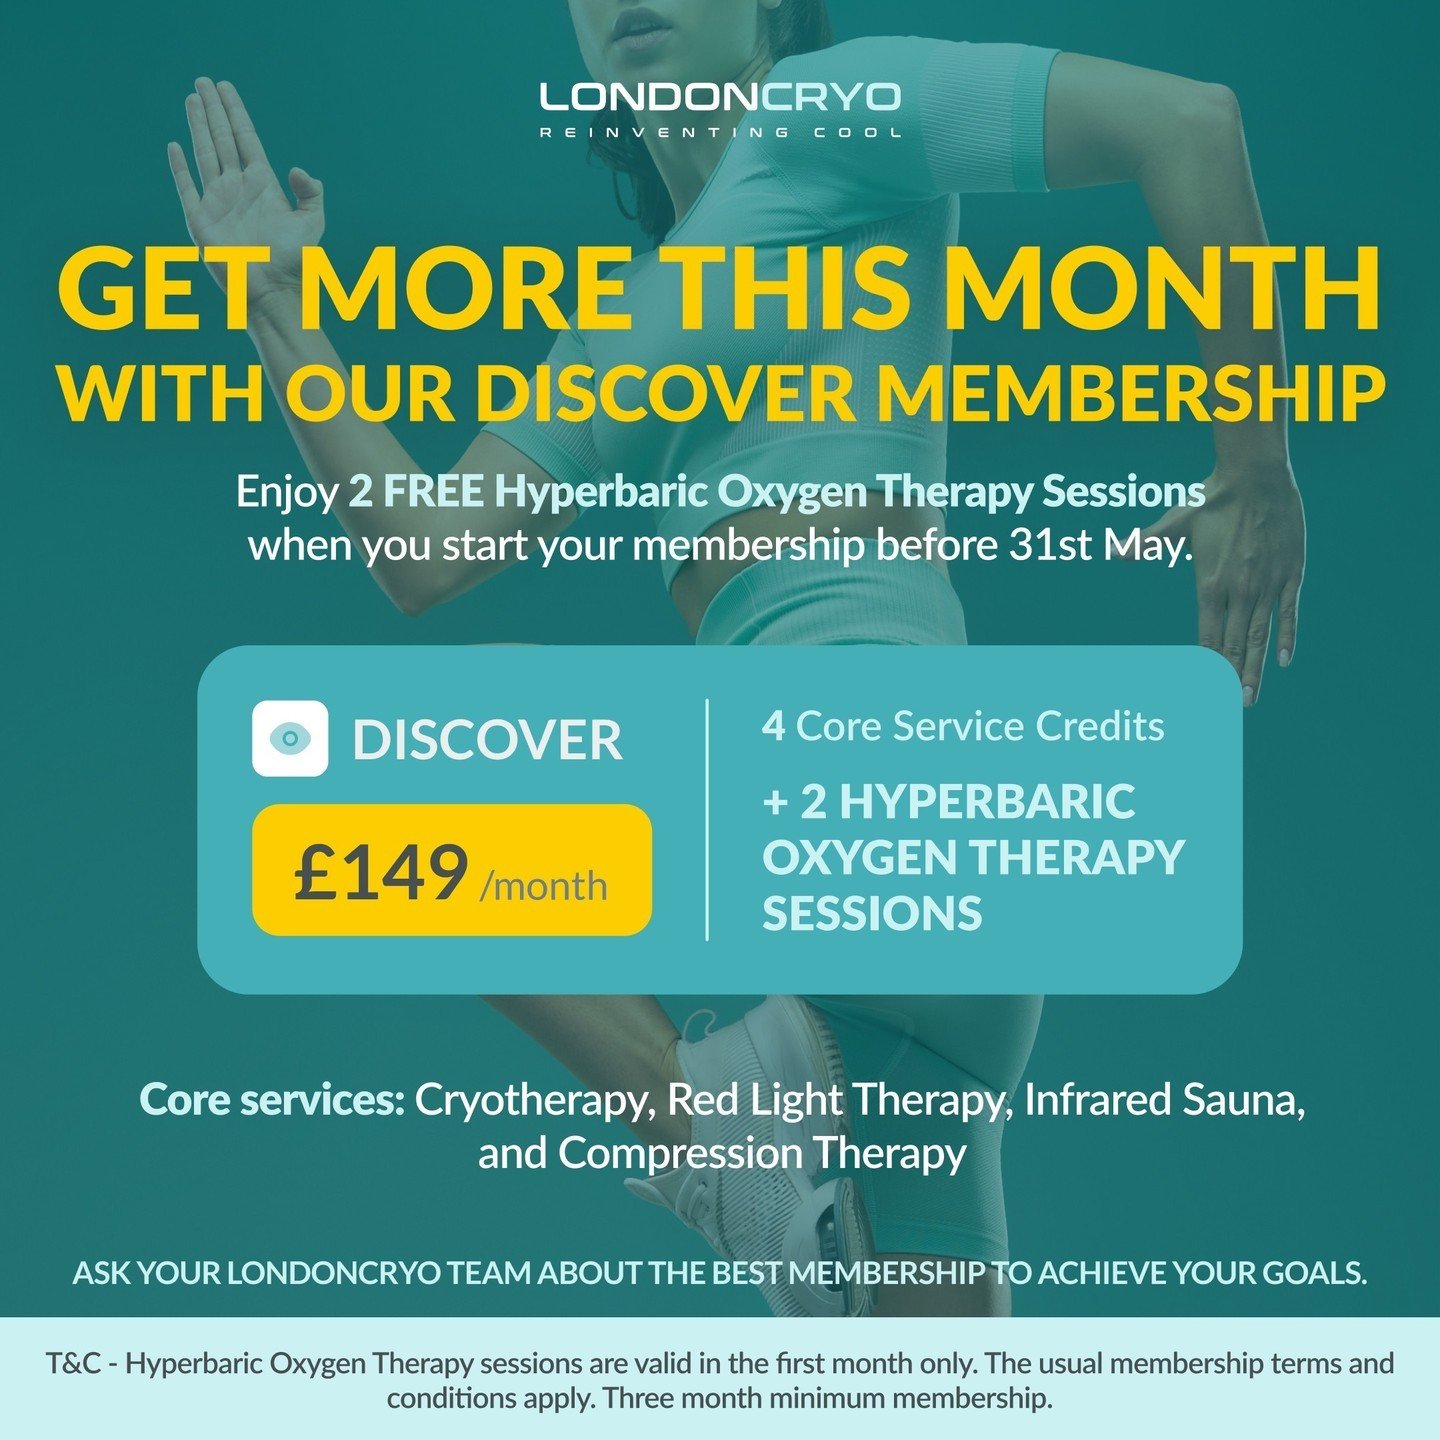 🌟 Get More This Month! 🌟⁠
Experience our Discover Membership and receive 2 complimentary Hyperbaric Oxygen Therapy Sessions! 💫⁠
⁠
For just &pound;149, enjoy 4 Core Service Credits + 2 HBOT Sessions. Immerse yourself in Cryotherapy, Red Light, Comp